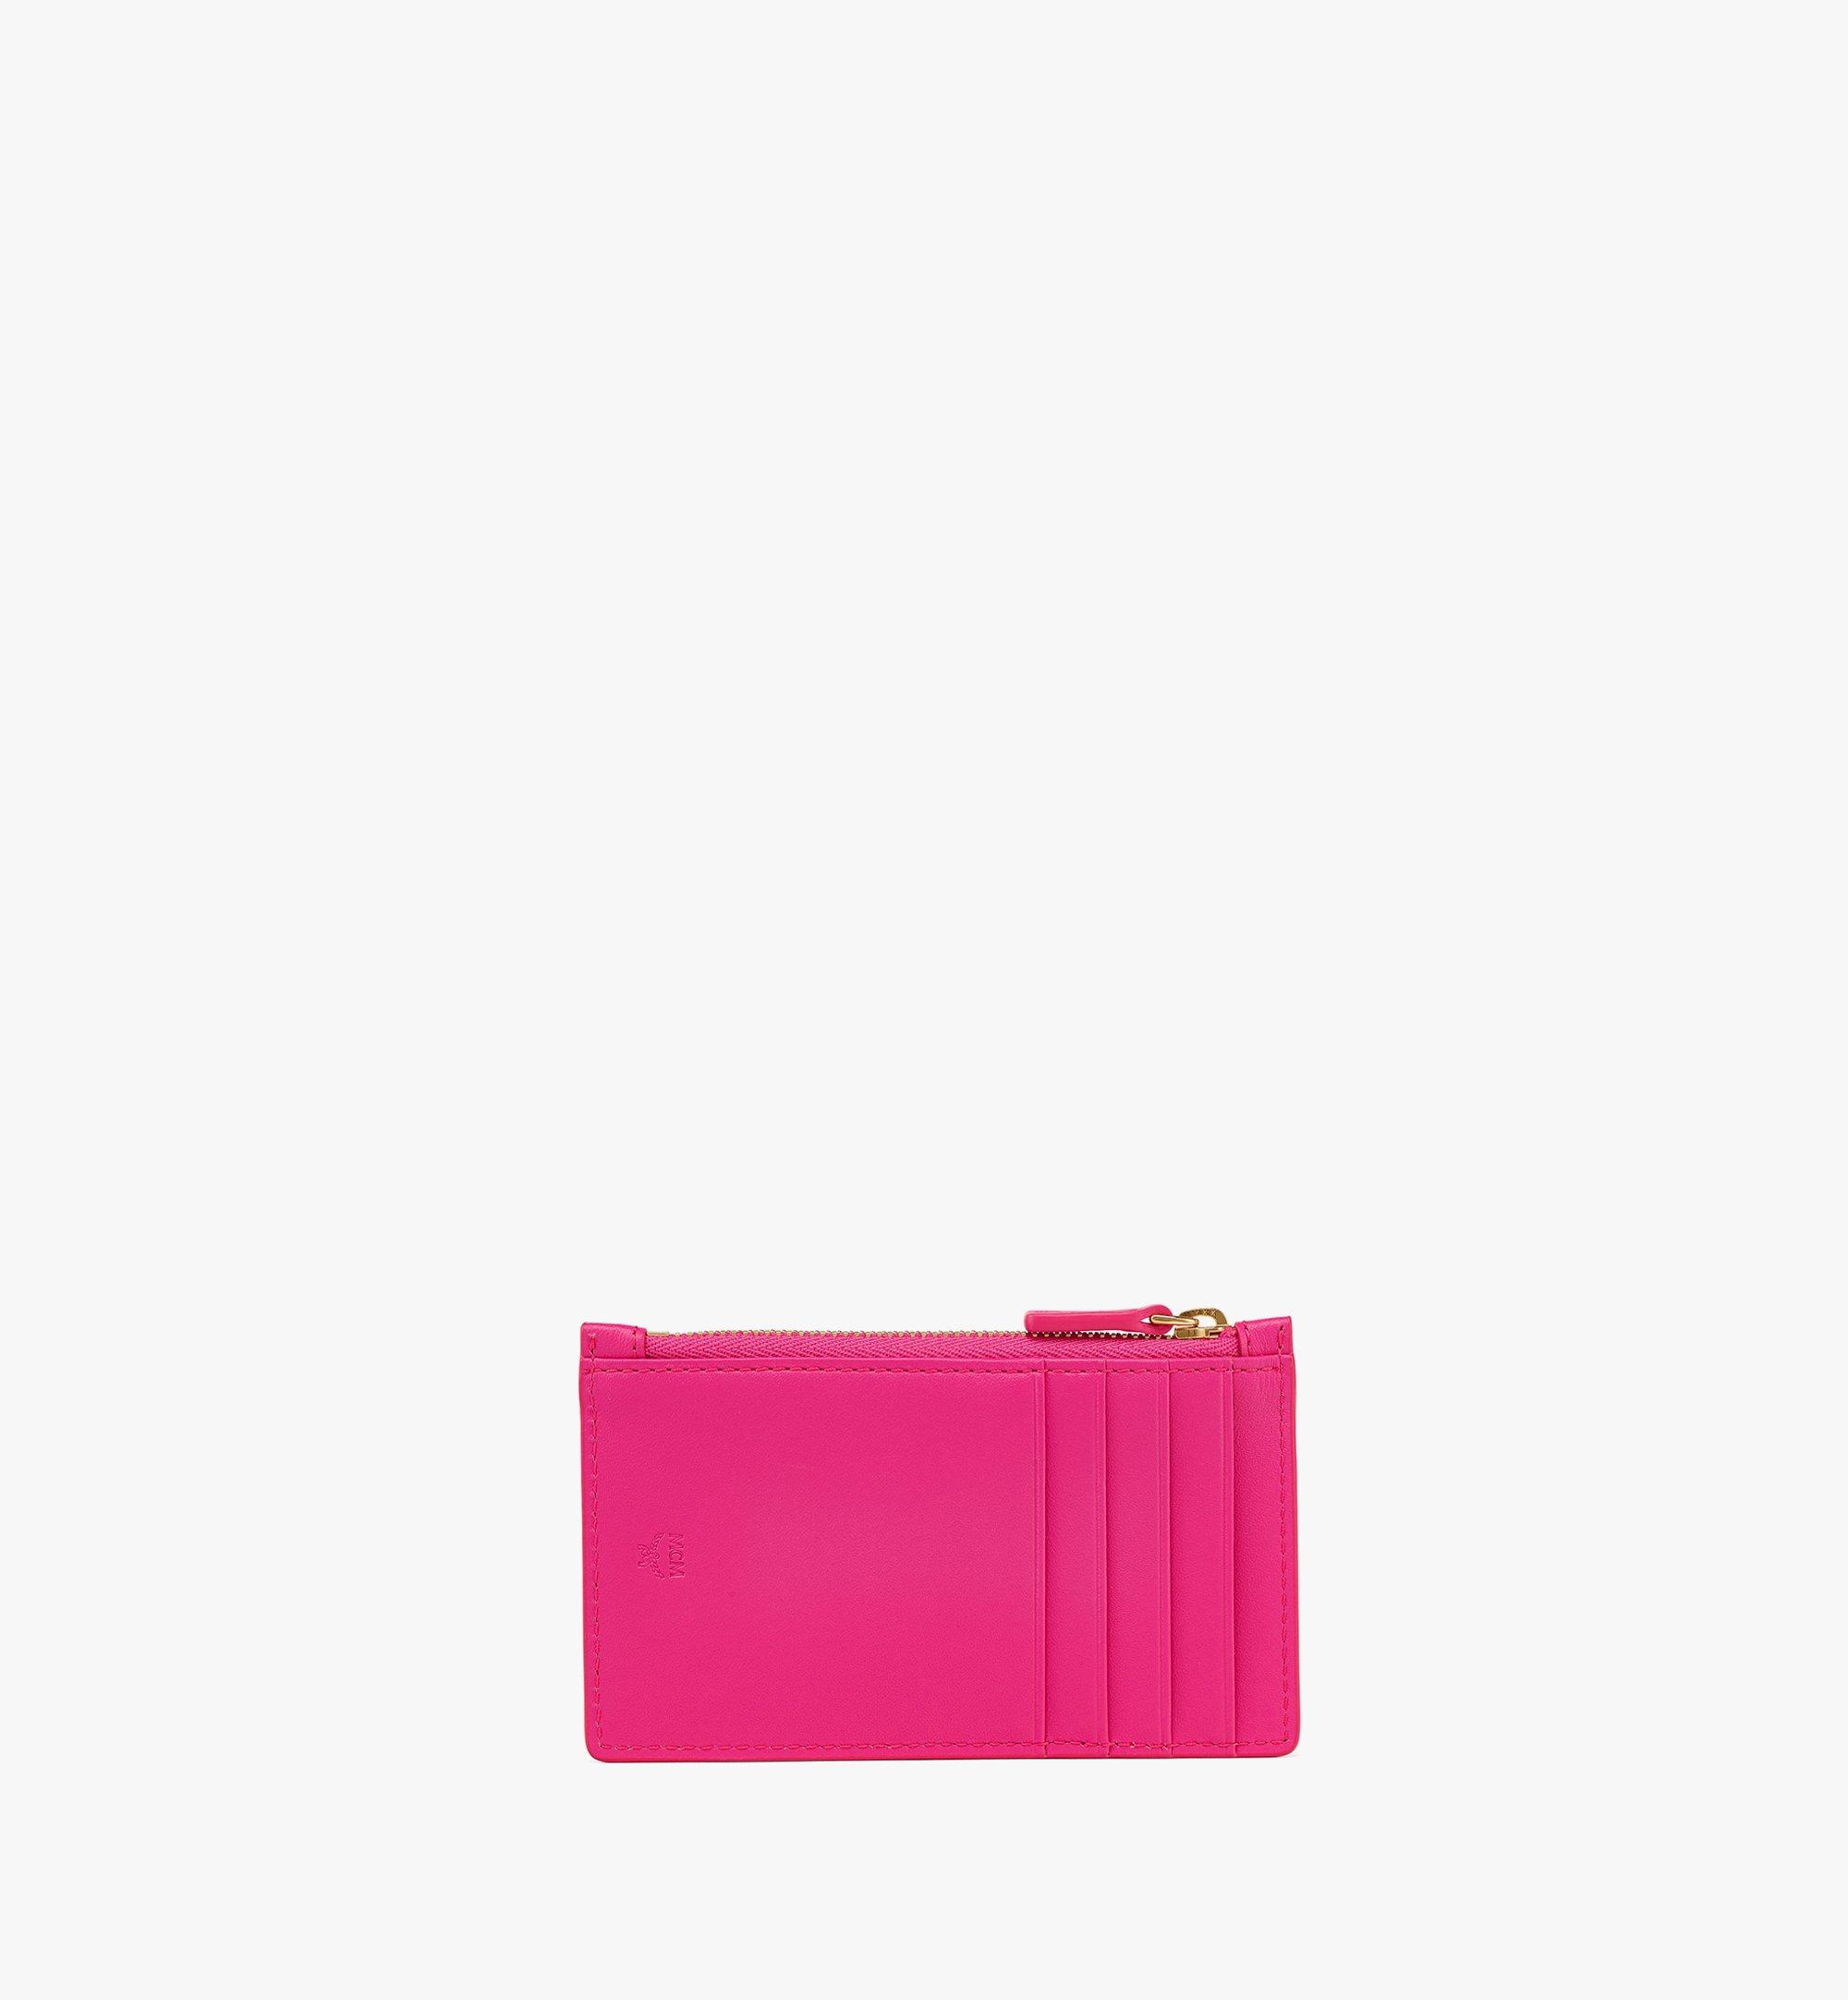 MCM Mode Travia Zip Card Case in Spanish Leather Pink MYACALD01QR001 Alternate View 2